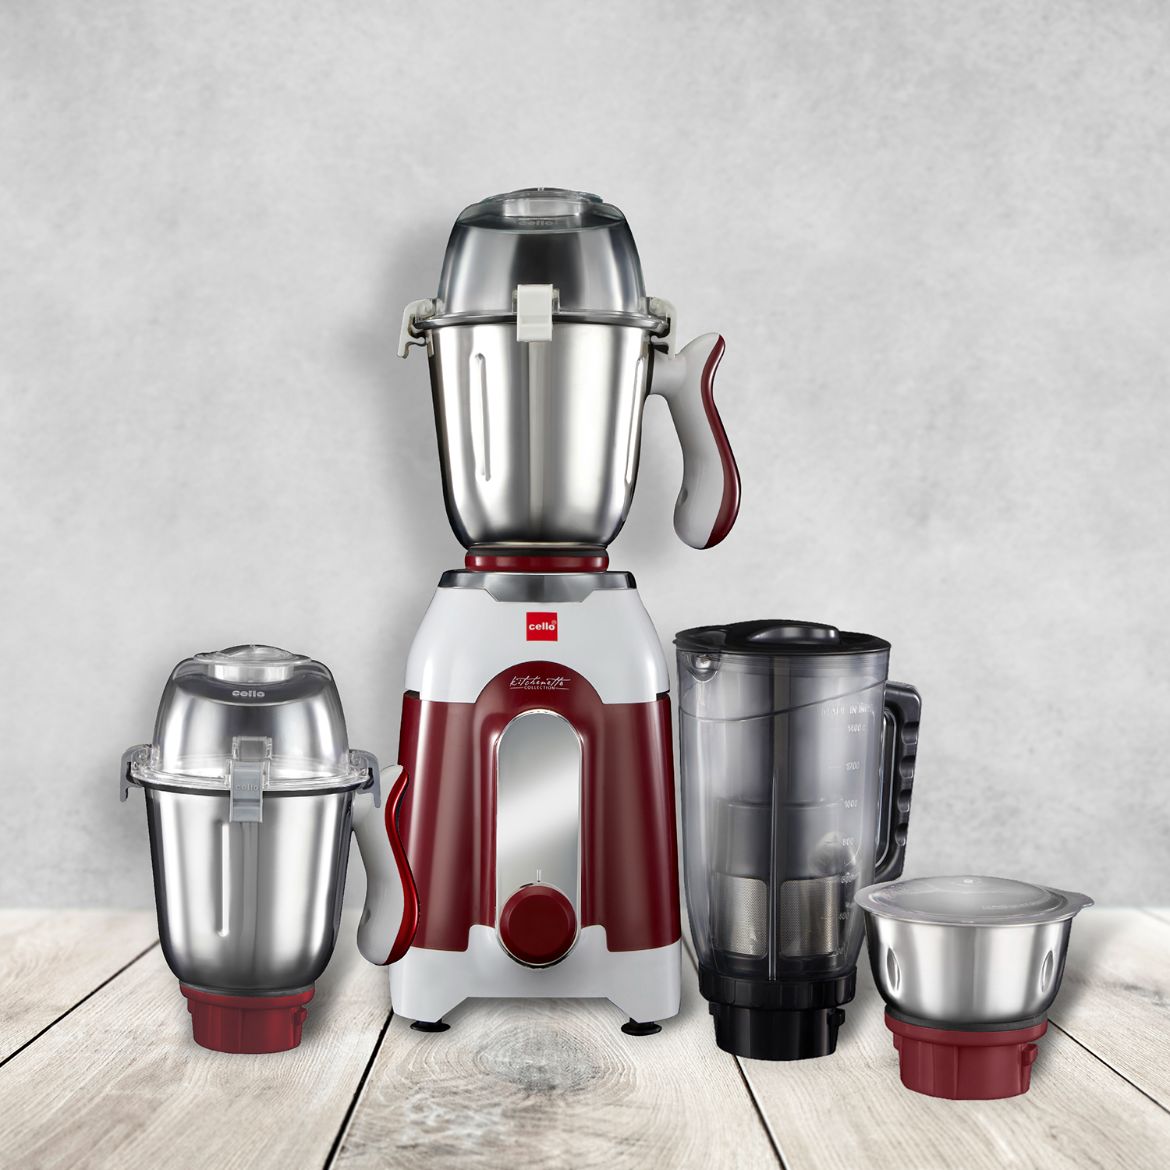 Discovery Pro Juicer Mixer Grinder with 4 Jars, 750W Maroon / 750 Watts